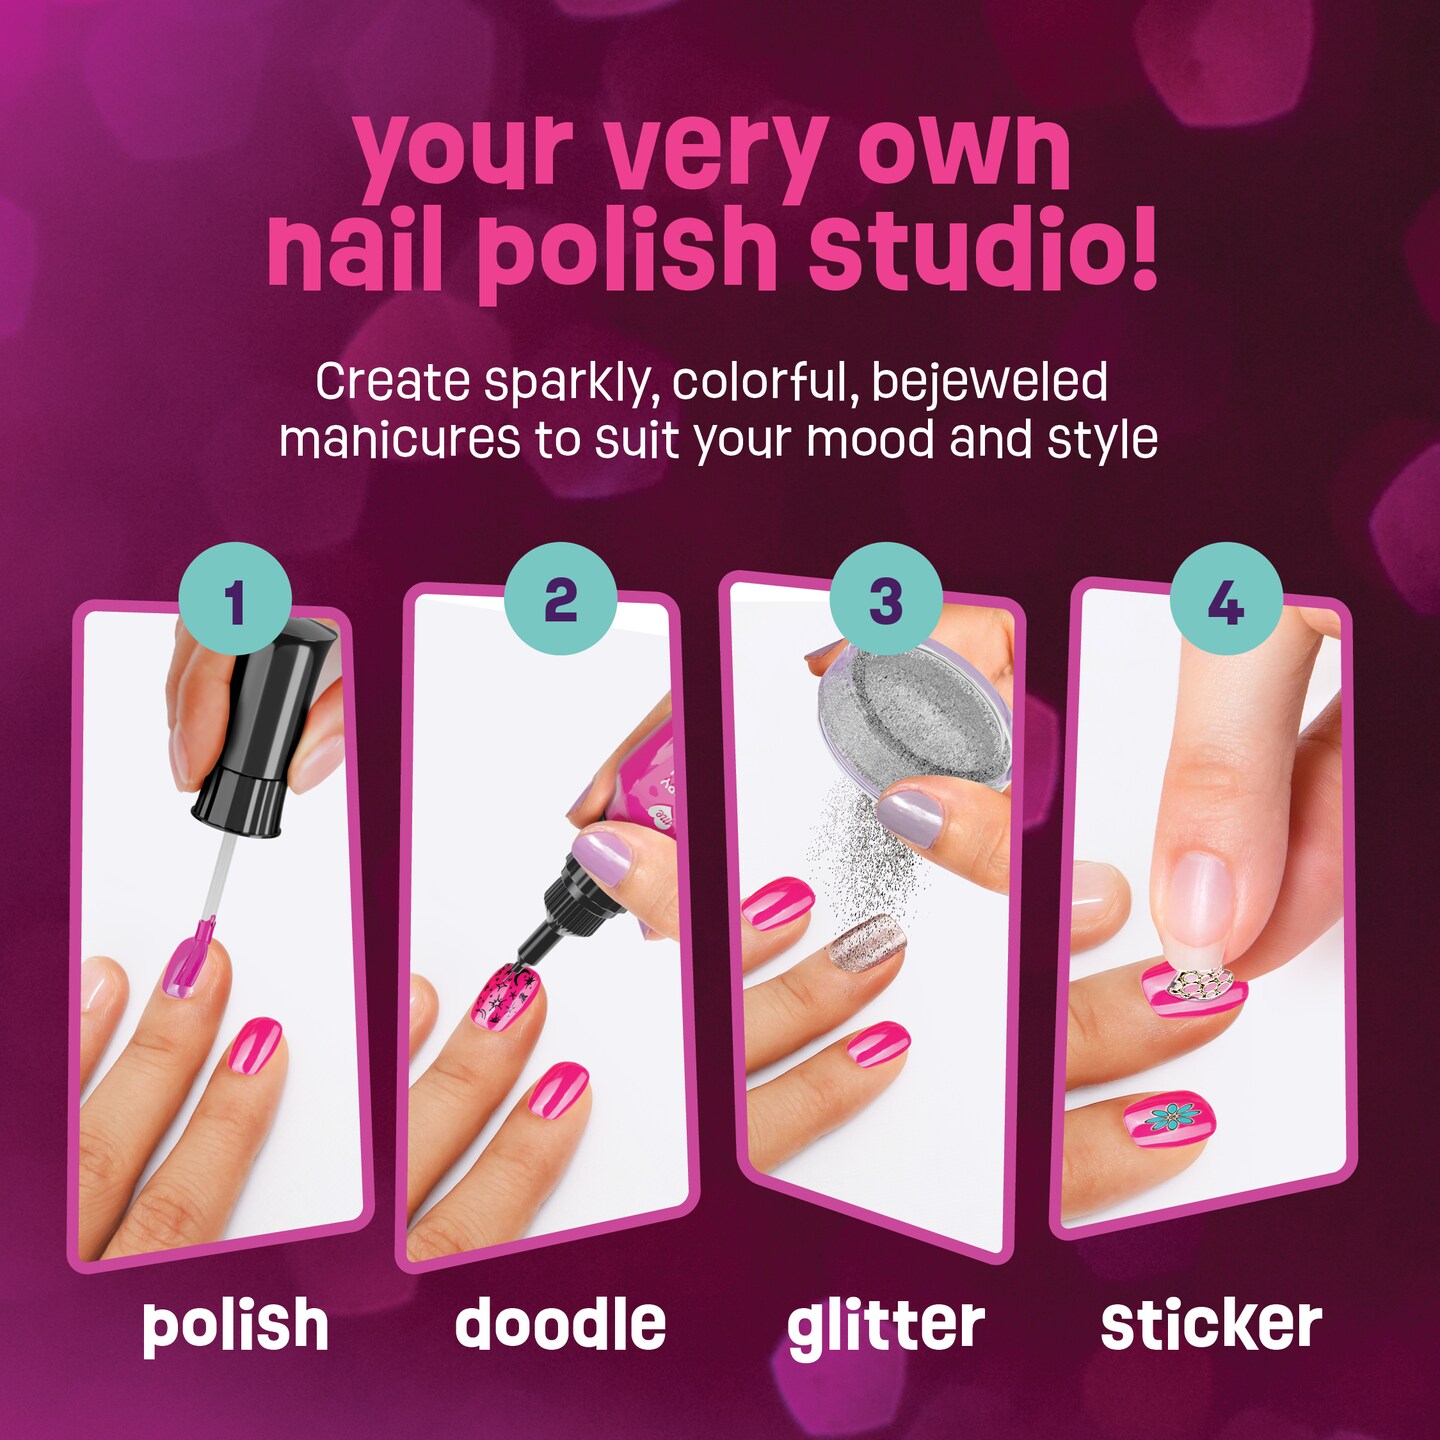 Nail Art Studio for Girls - Nail Polish Kit for Kids Ages 7-12 Years Old - Girl Gifts Ideas - Girls Nails Gift Set - Cool Girly Stuff - Polish, Pens, Glitter, Stickers, Gems, Filer